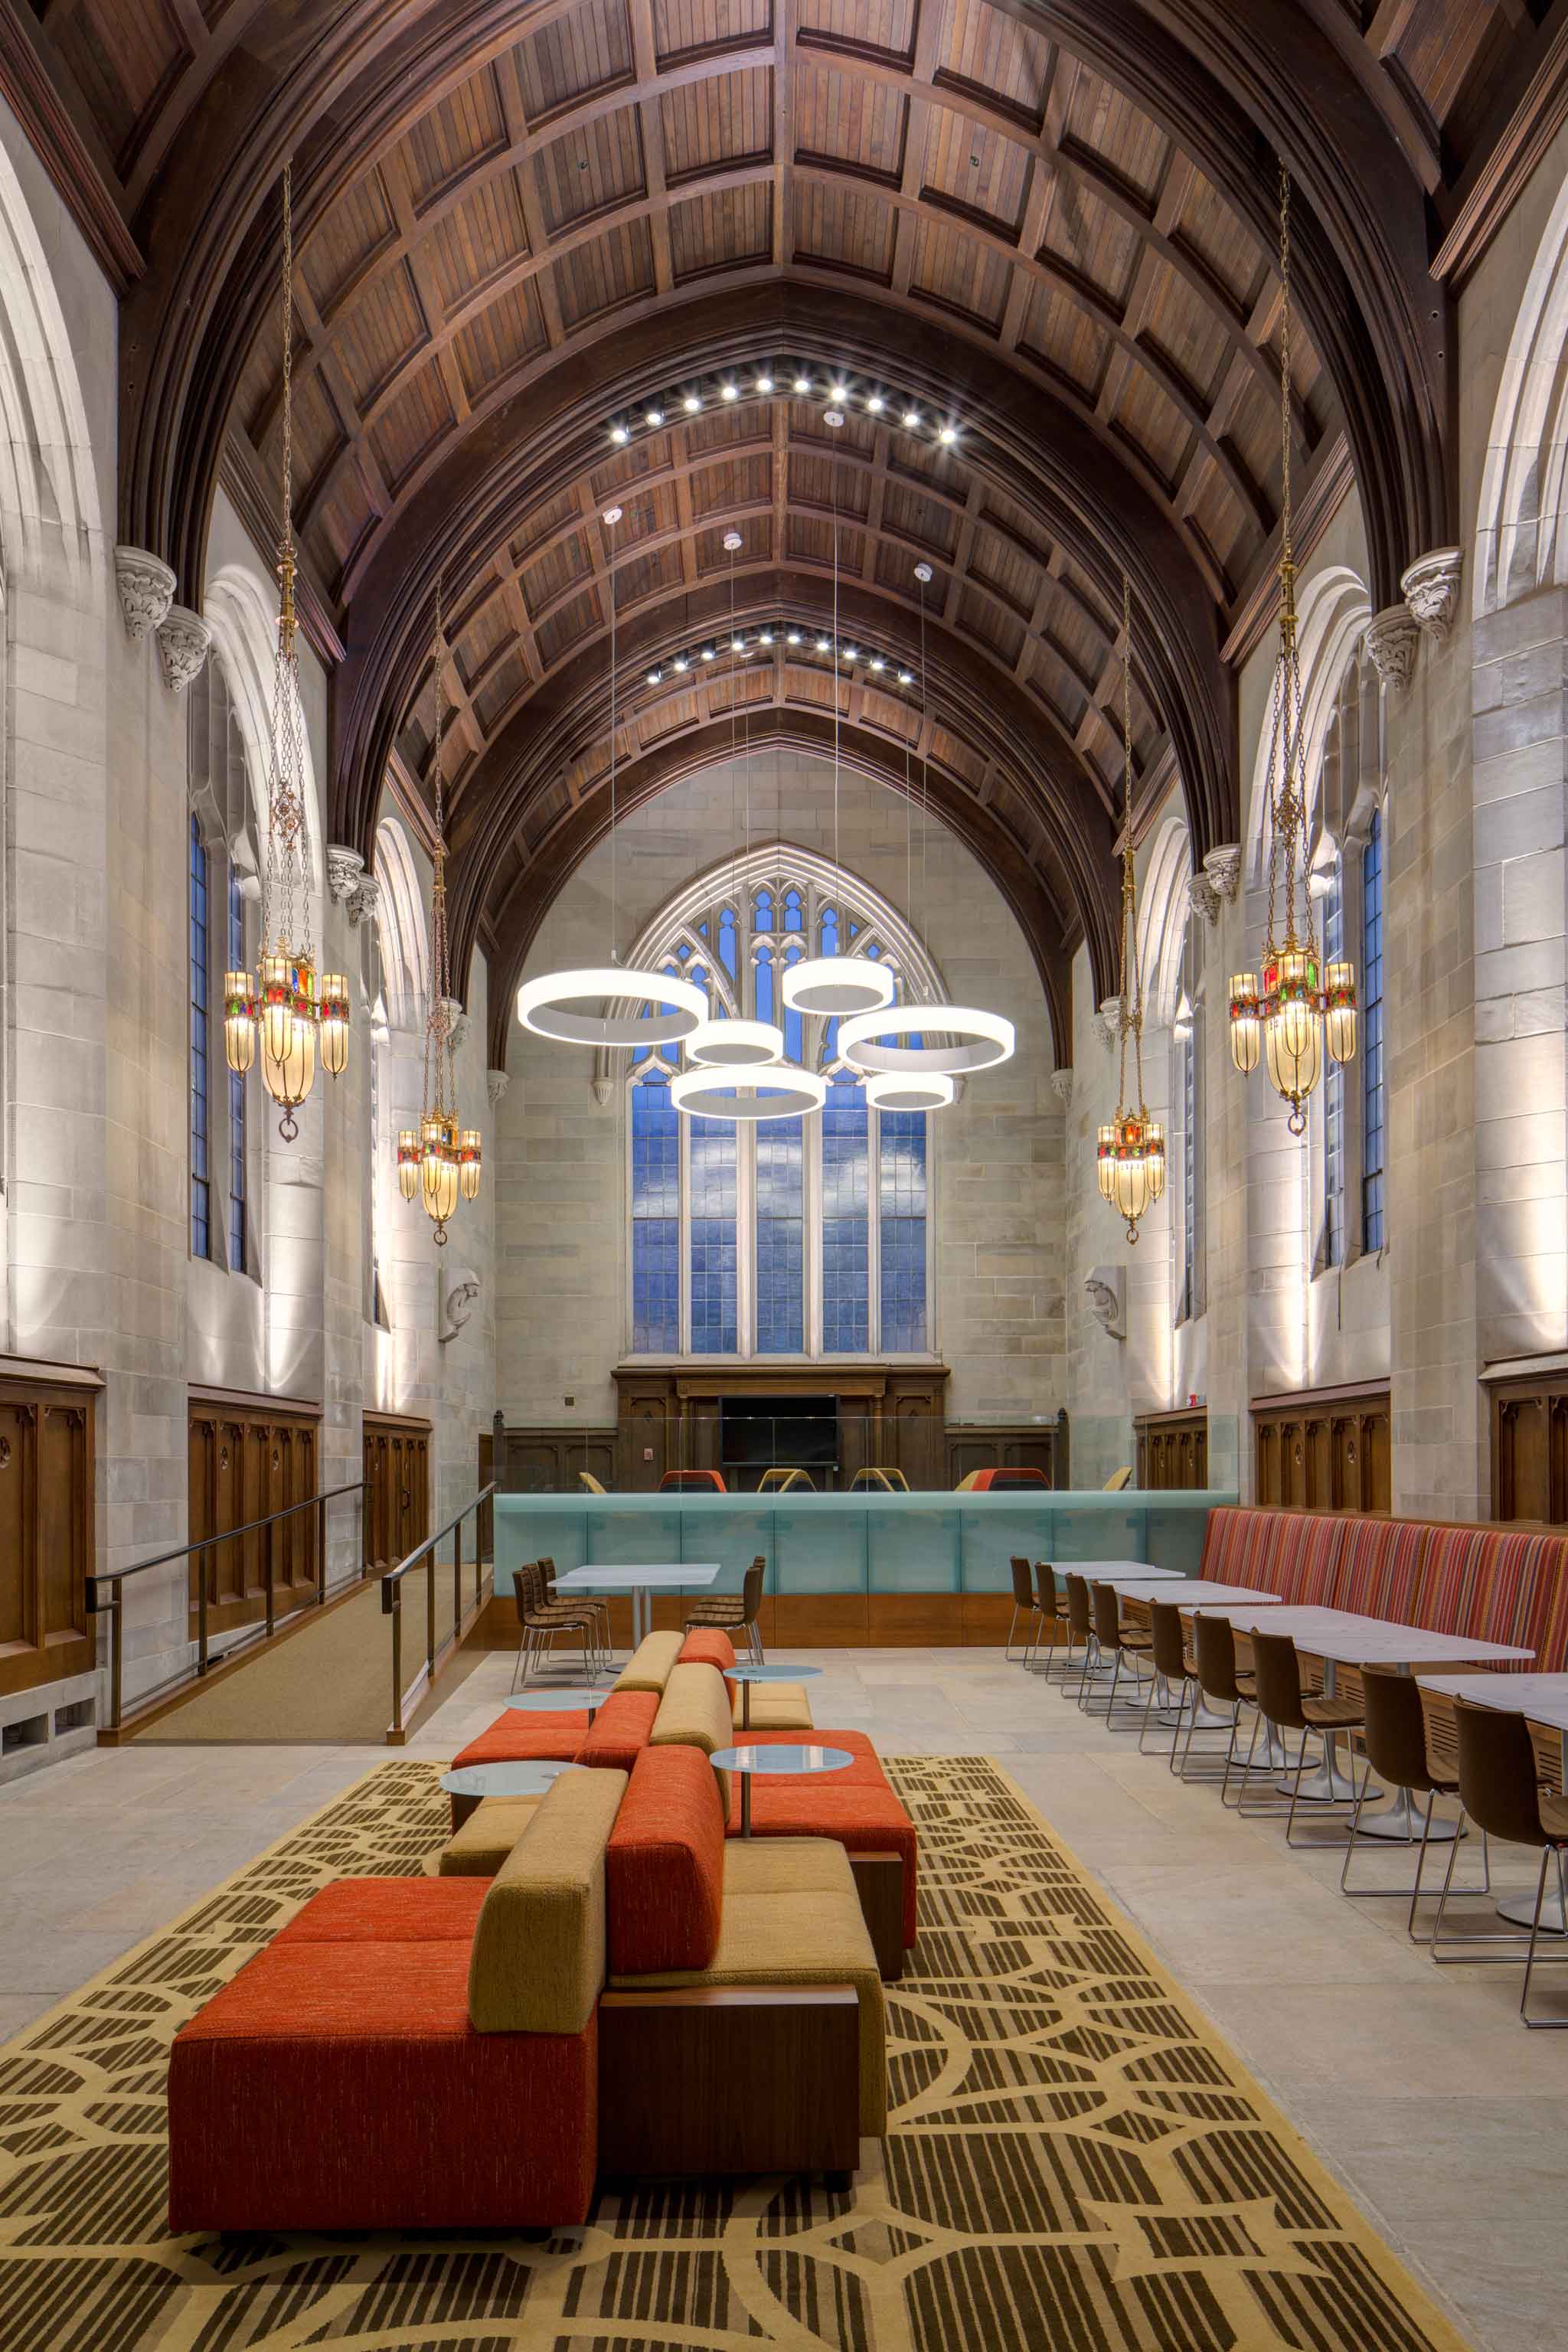 University of Chicago Saieh Hall for Economics, Ann Beha Architects (Boston) with Gensler (Chicago), Carpet by Creative Matters | Image courtesy of Tom Rossiter / Creative Matters